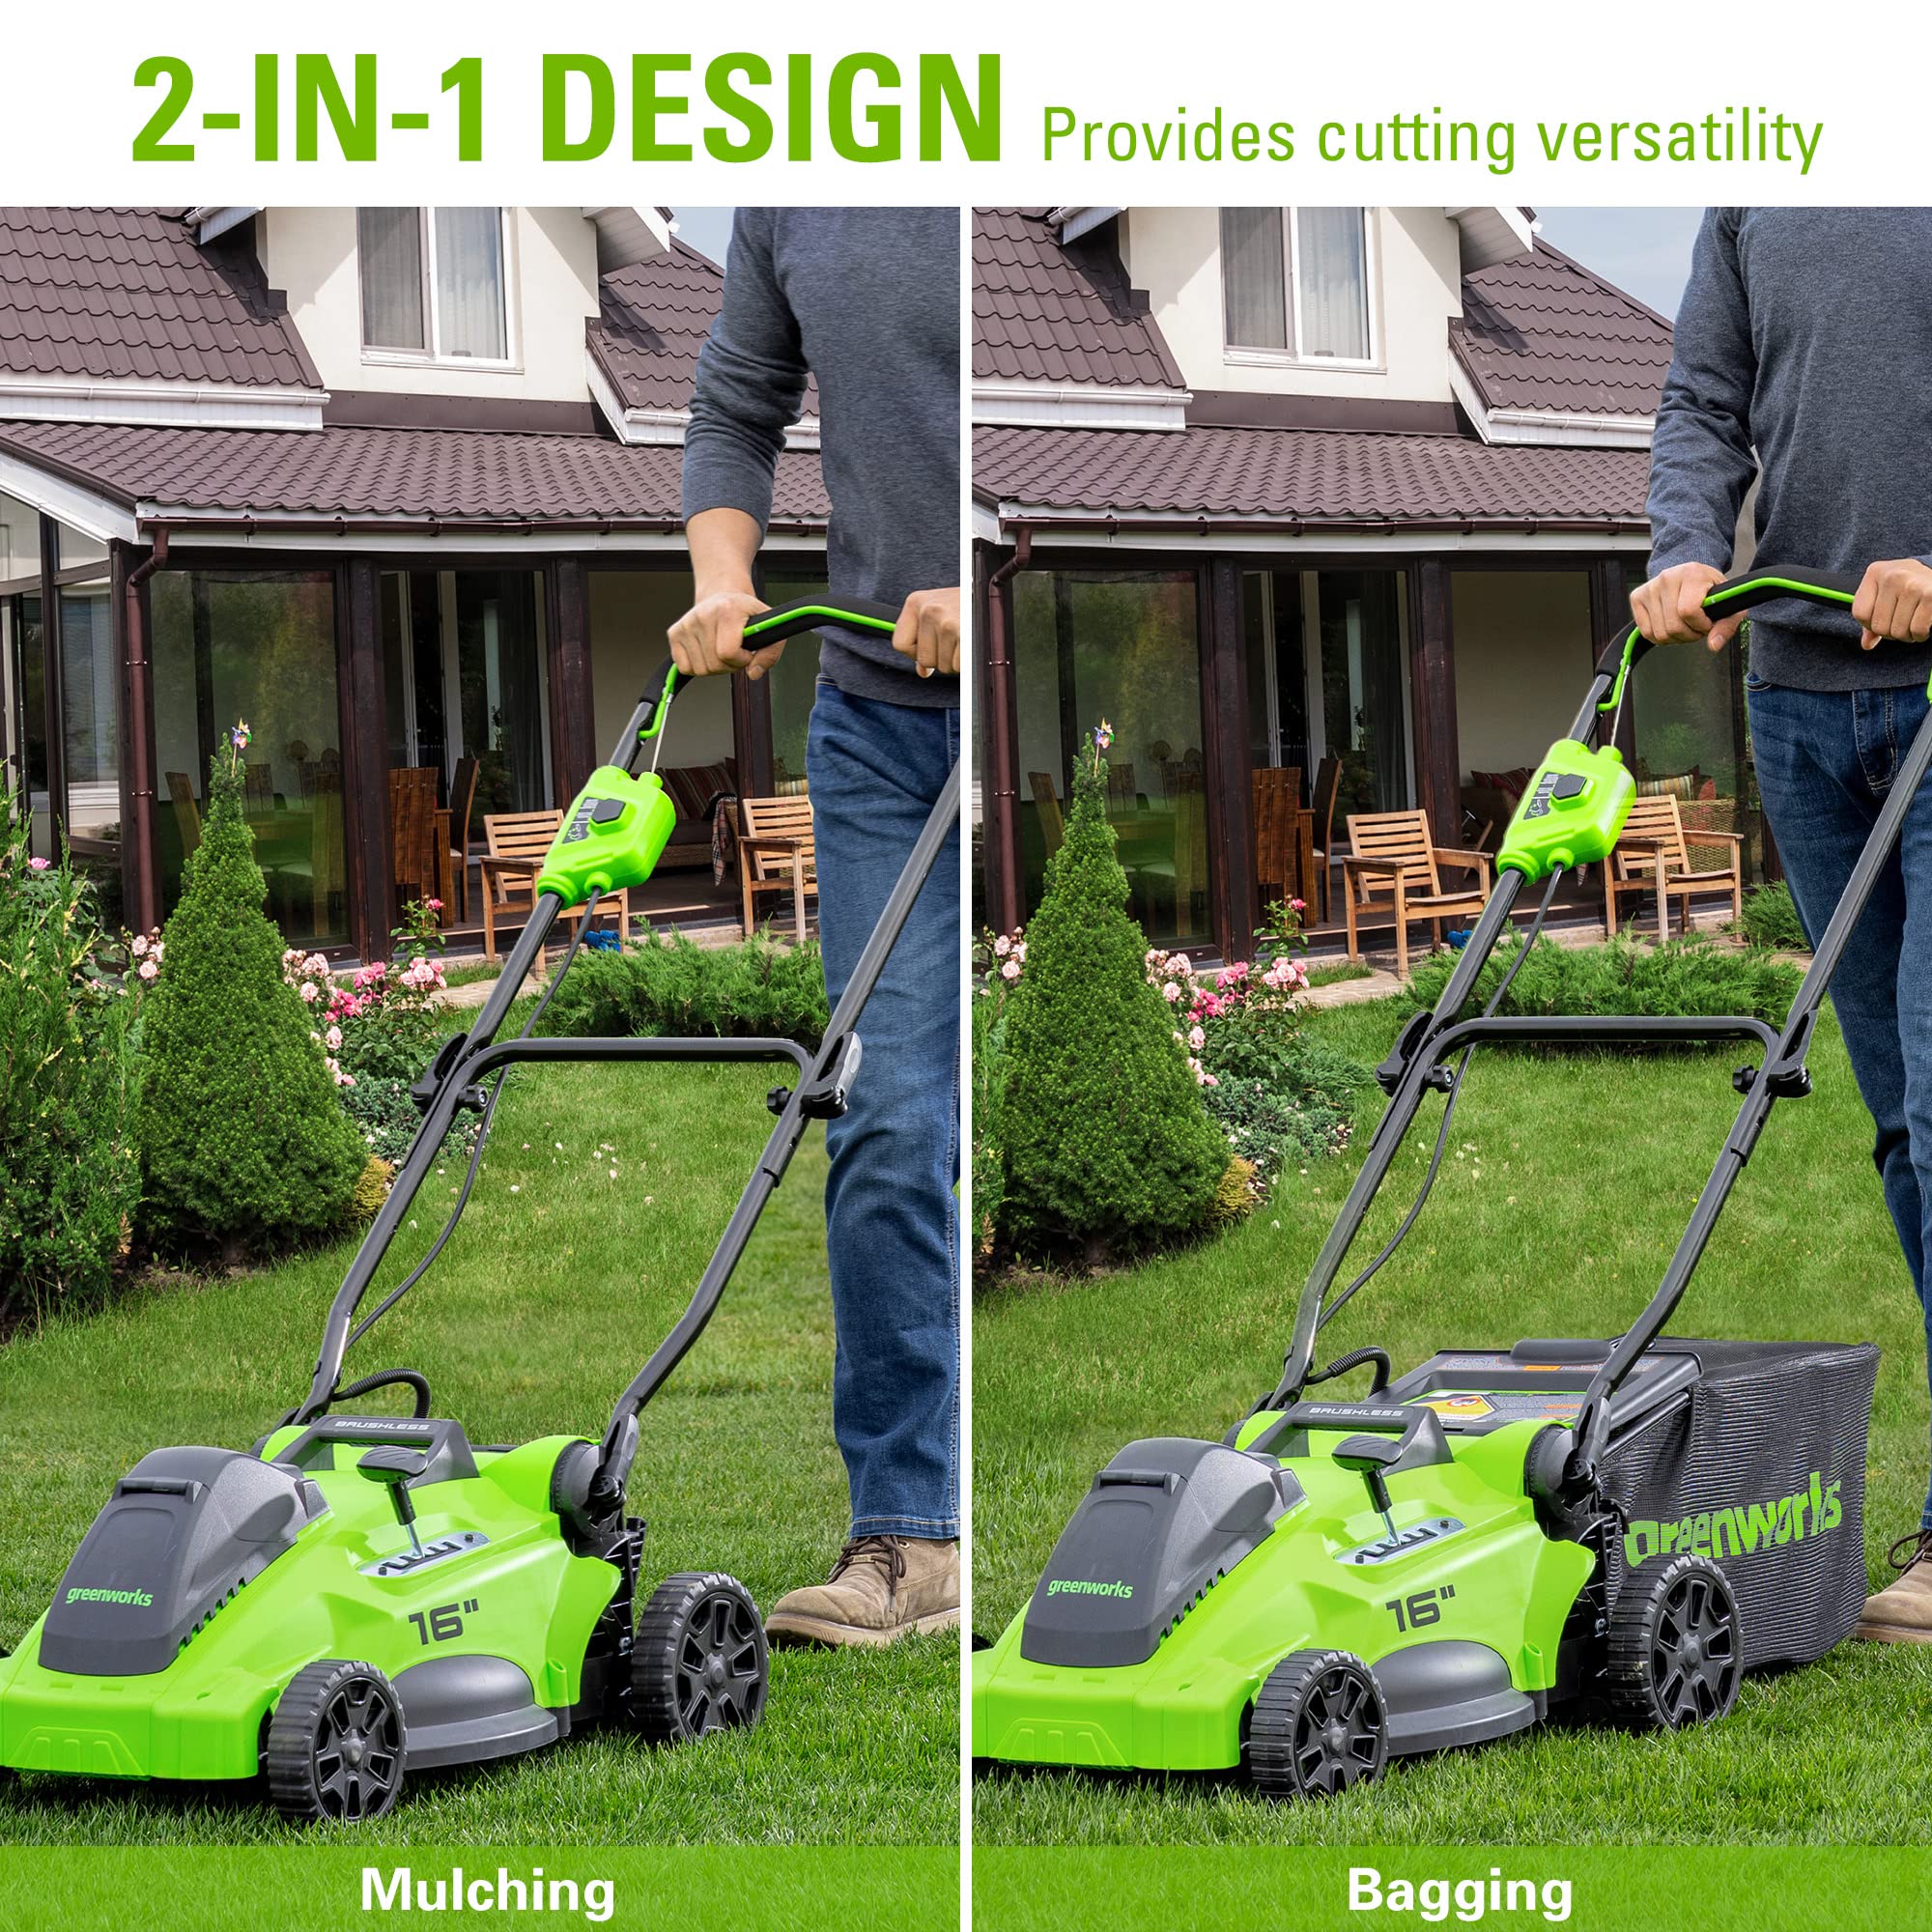 40V 16" Cordless Battery Brushless Push Lawn Mower w/ 4.0Ah Battery & Charger